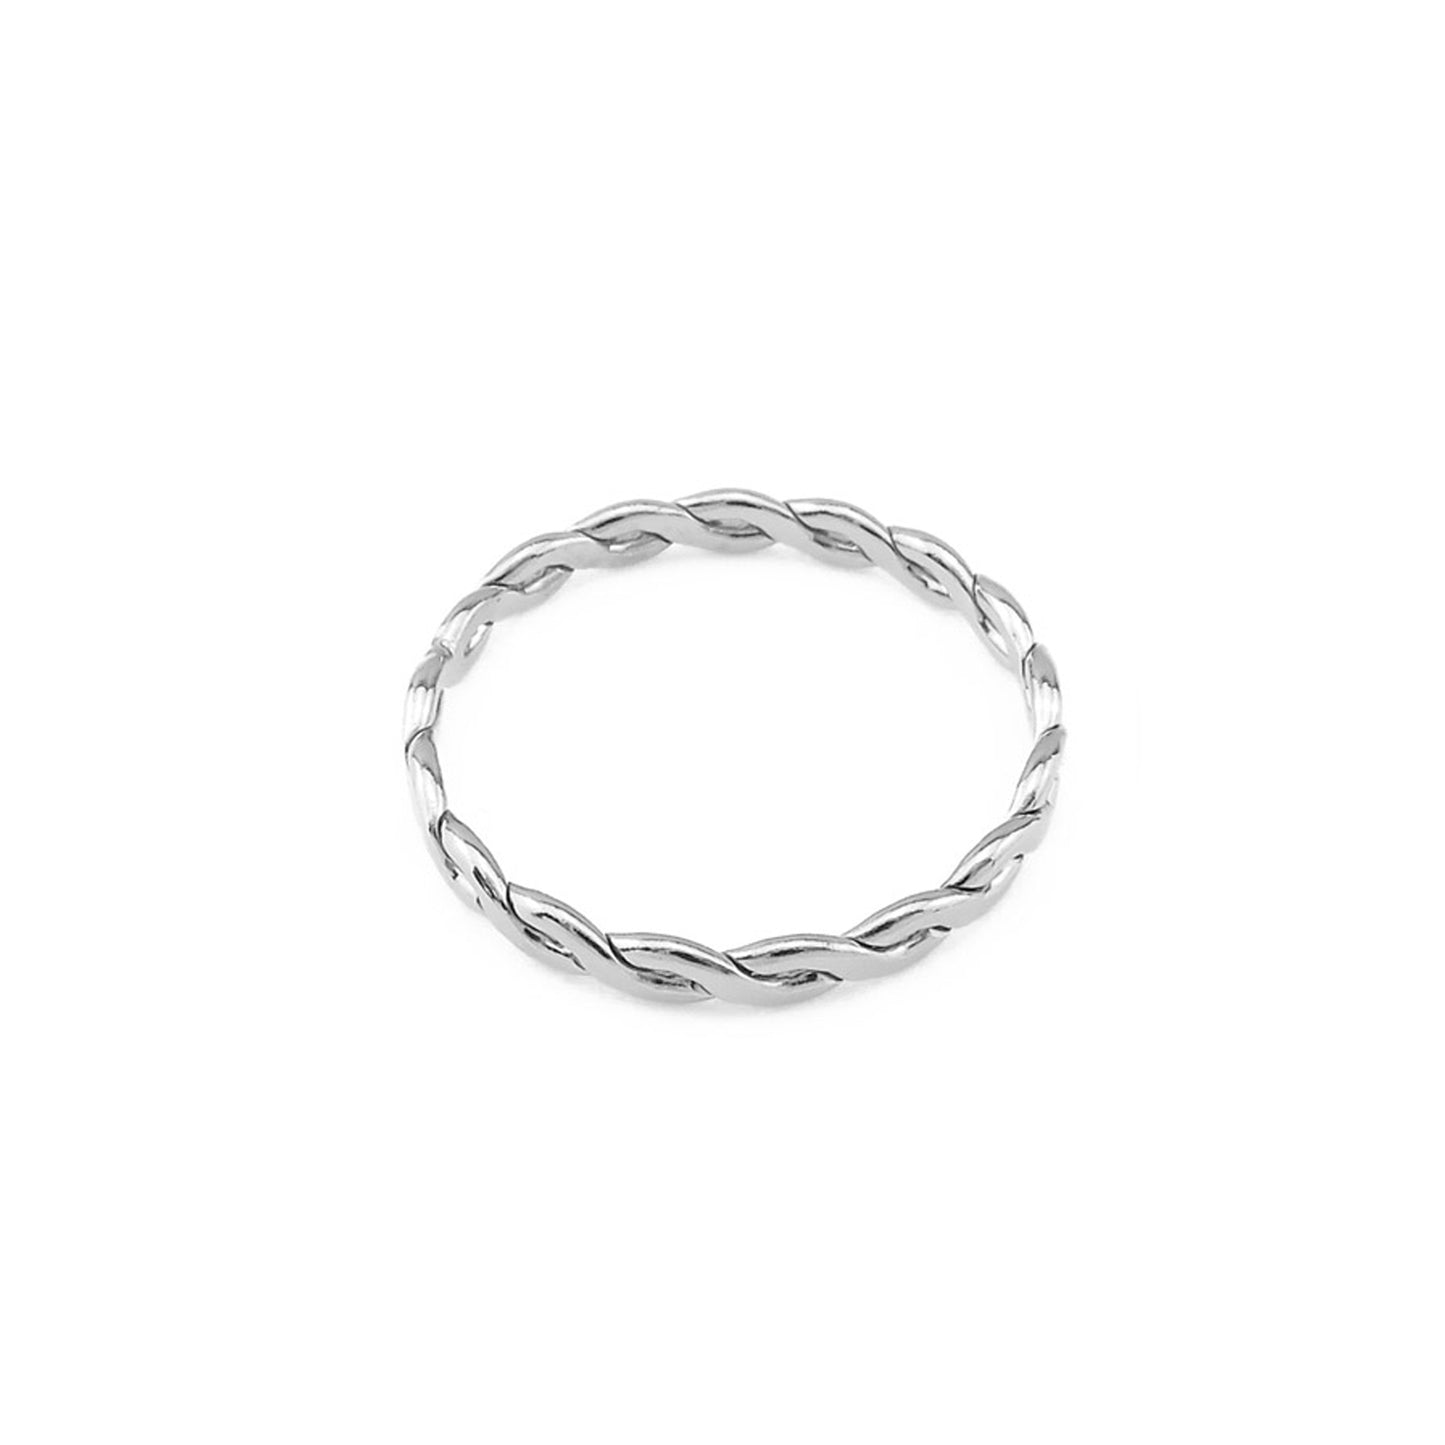 Sterling Silver Braided Woven Stacking Ring